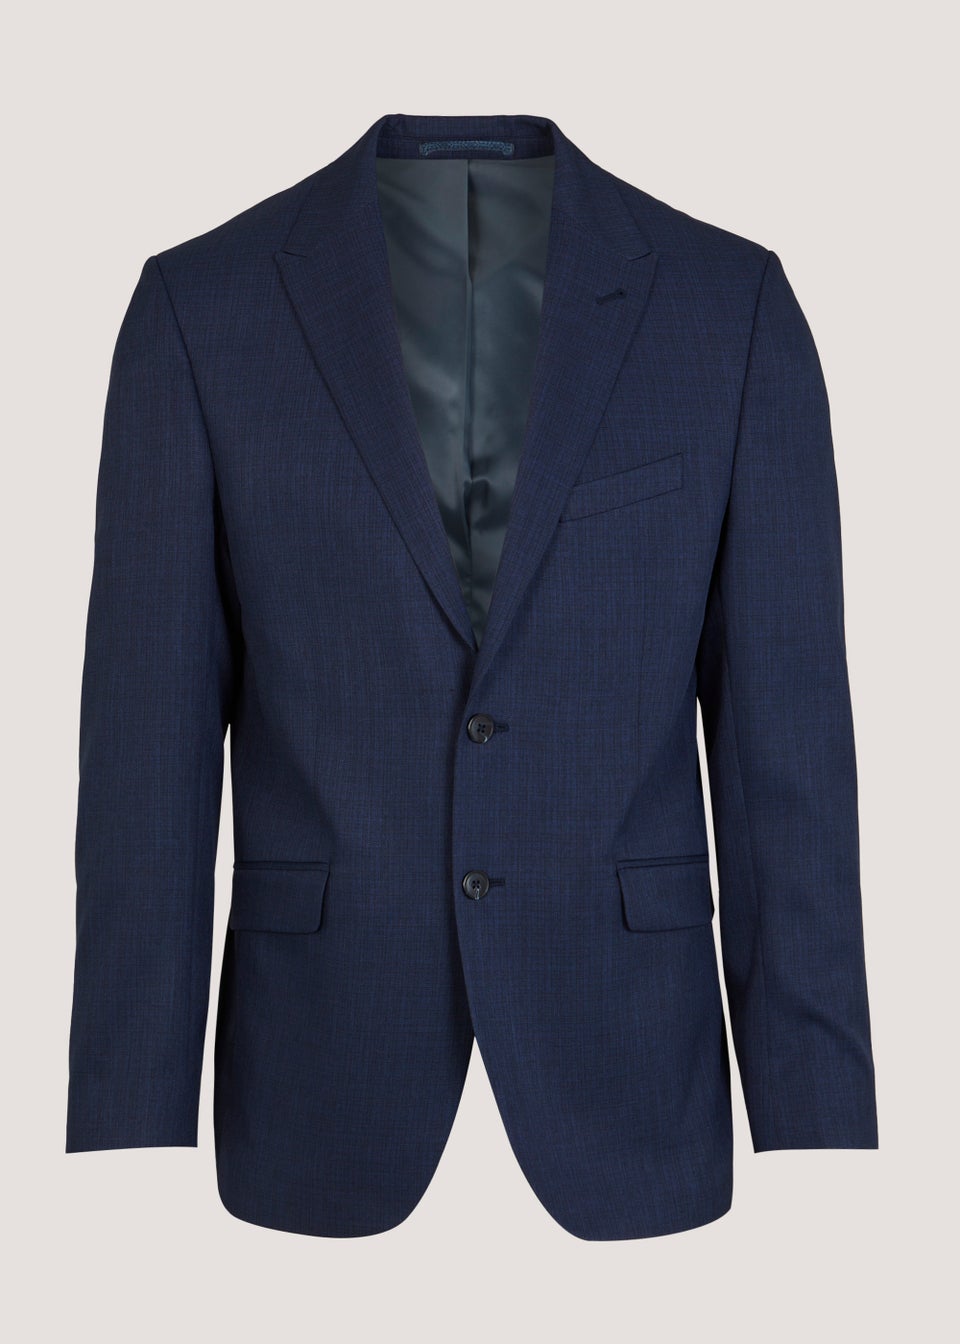 Taylor & Wright Cooper Navy Tailored Fit Suit Jacket - Matalan